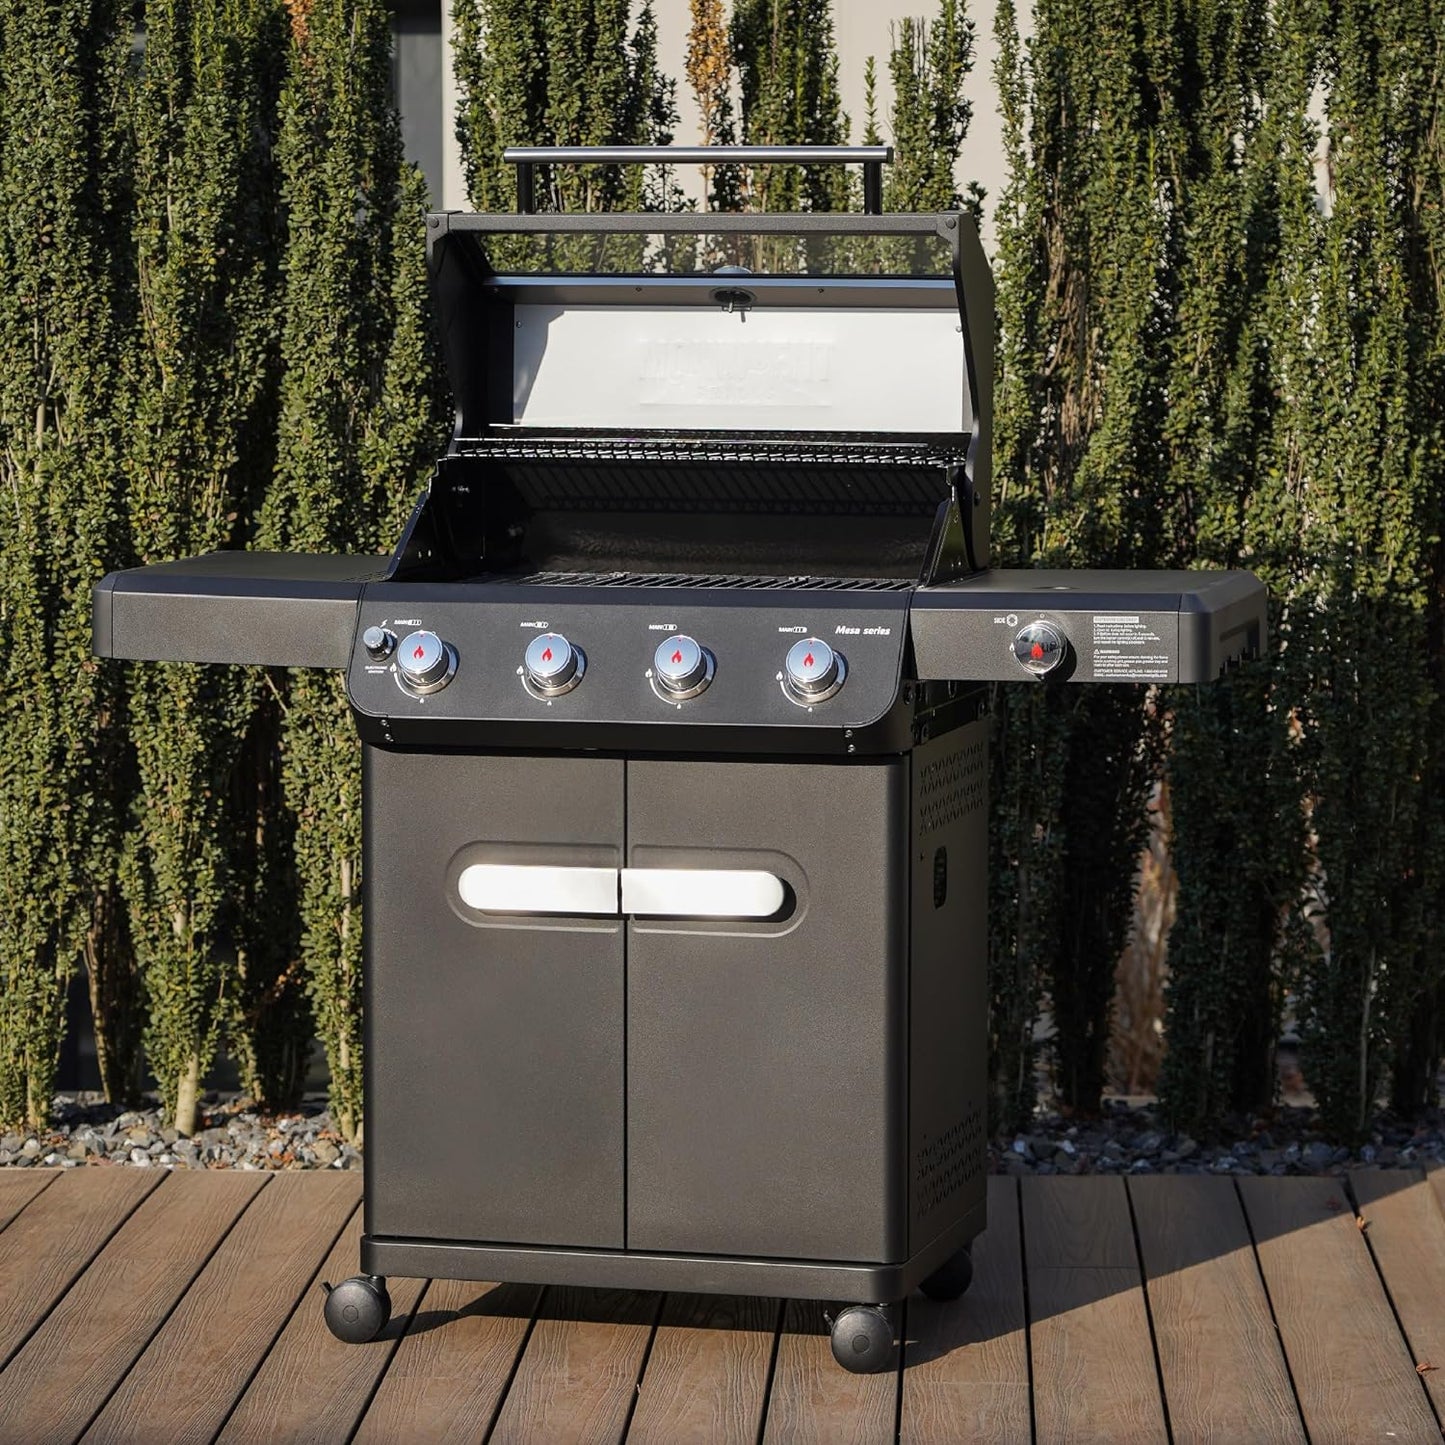 Outdoor Barbecue Stainless Steel 4 Burner Propane Gas Grill, 52,000 BTU Patio Garden Barbecue Grill with Side Burner and LED Controls, Mesa425, Black